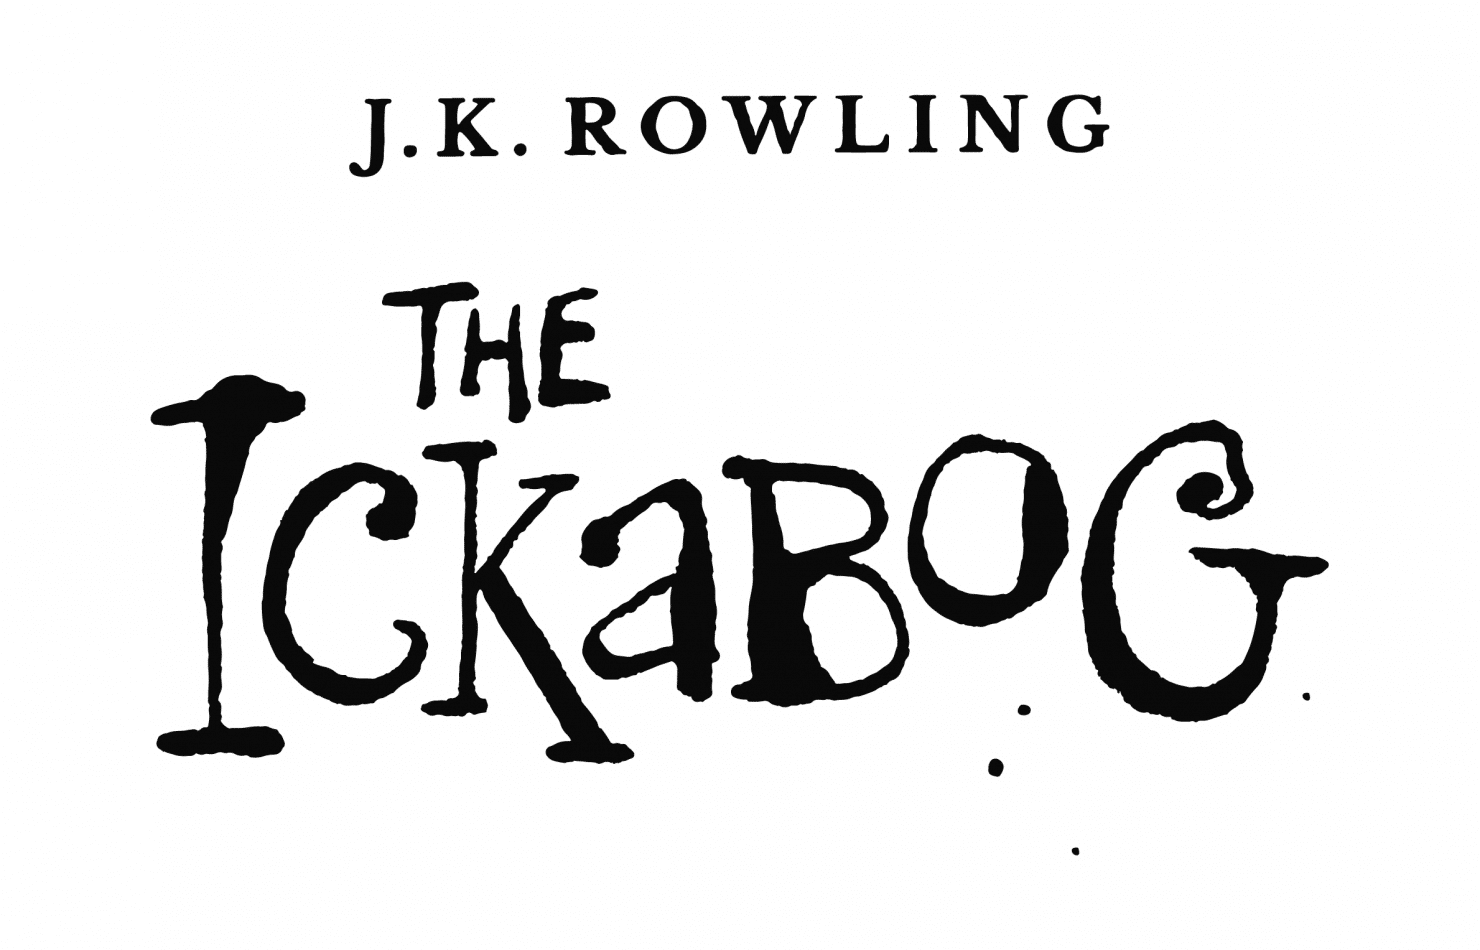 J.K. Rowling sharing new story 'The Ickabog' online for free